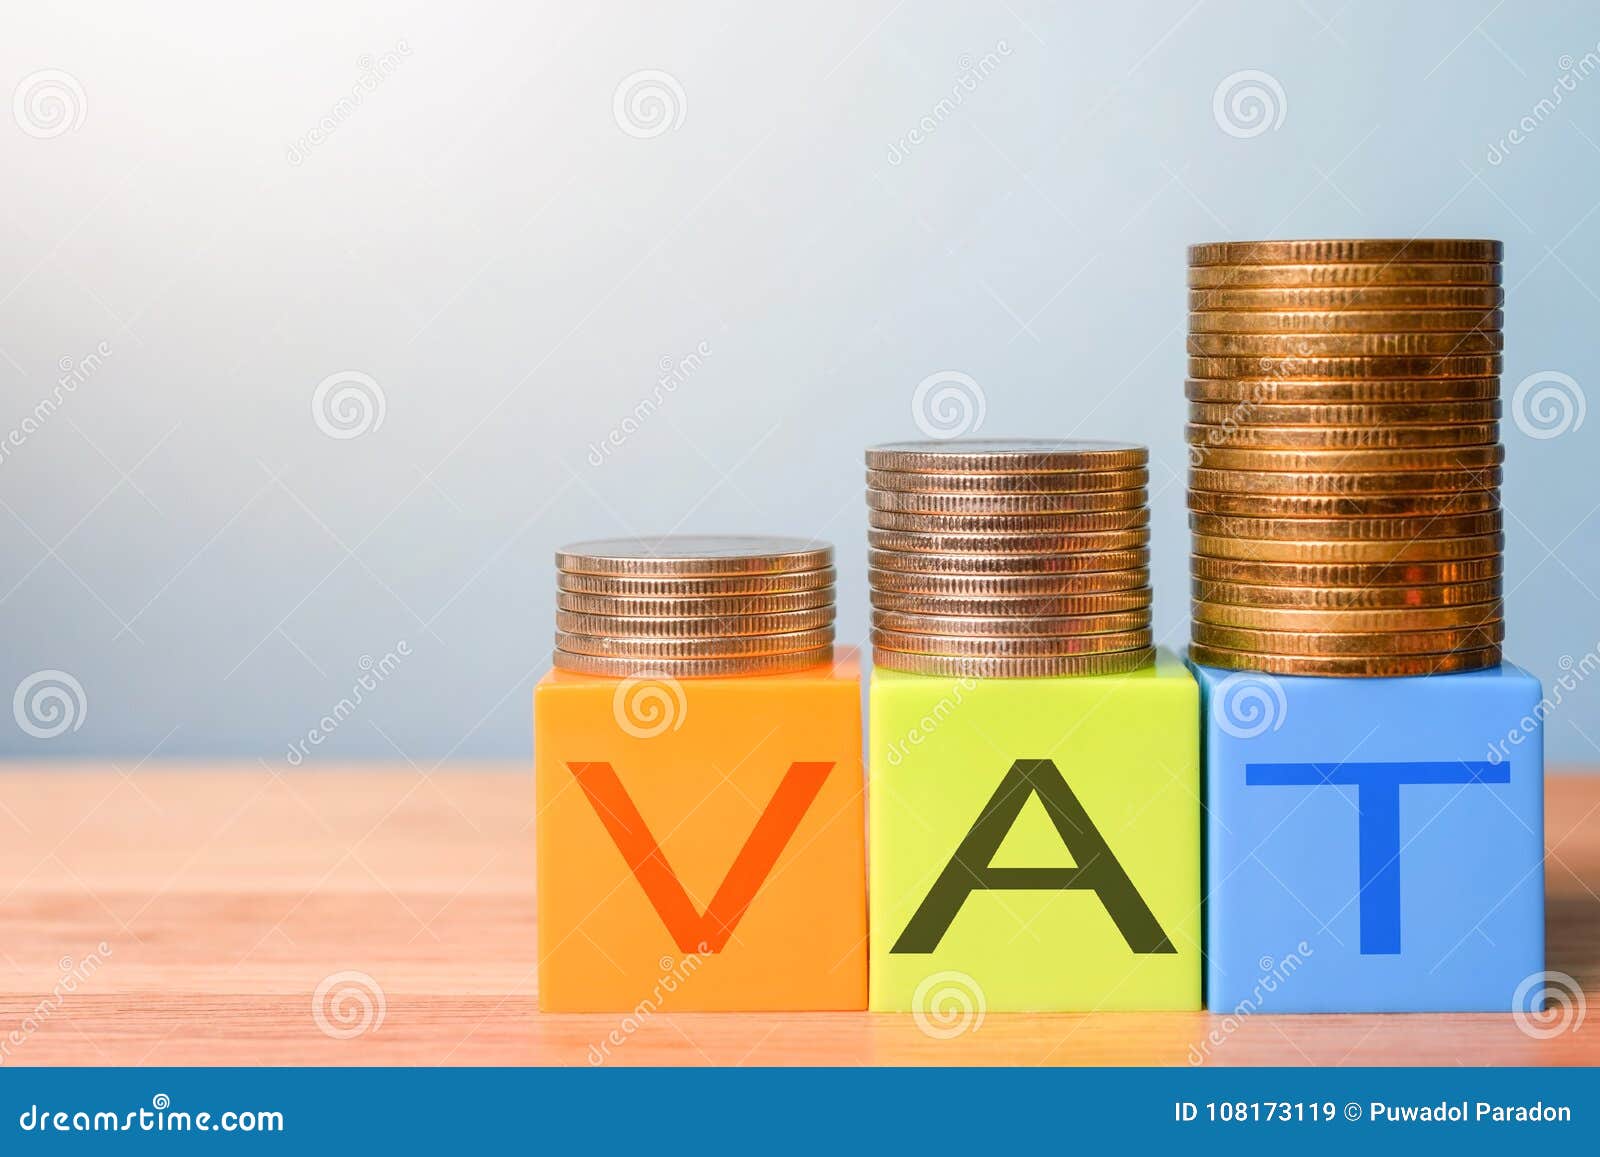 growing taxes - colour blocks with vat and money stacks